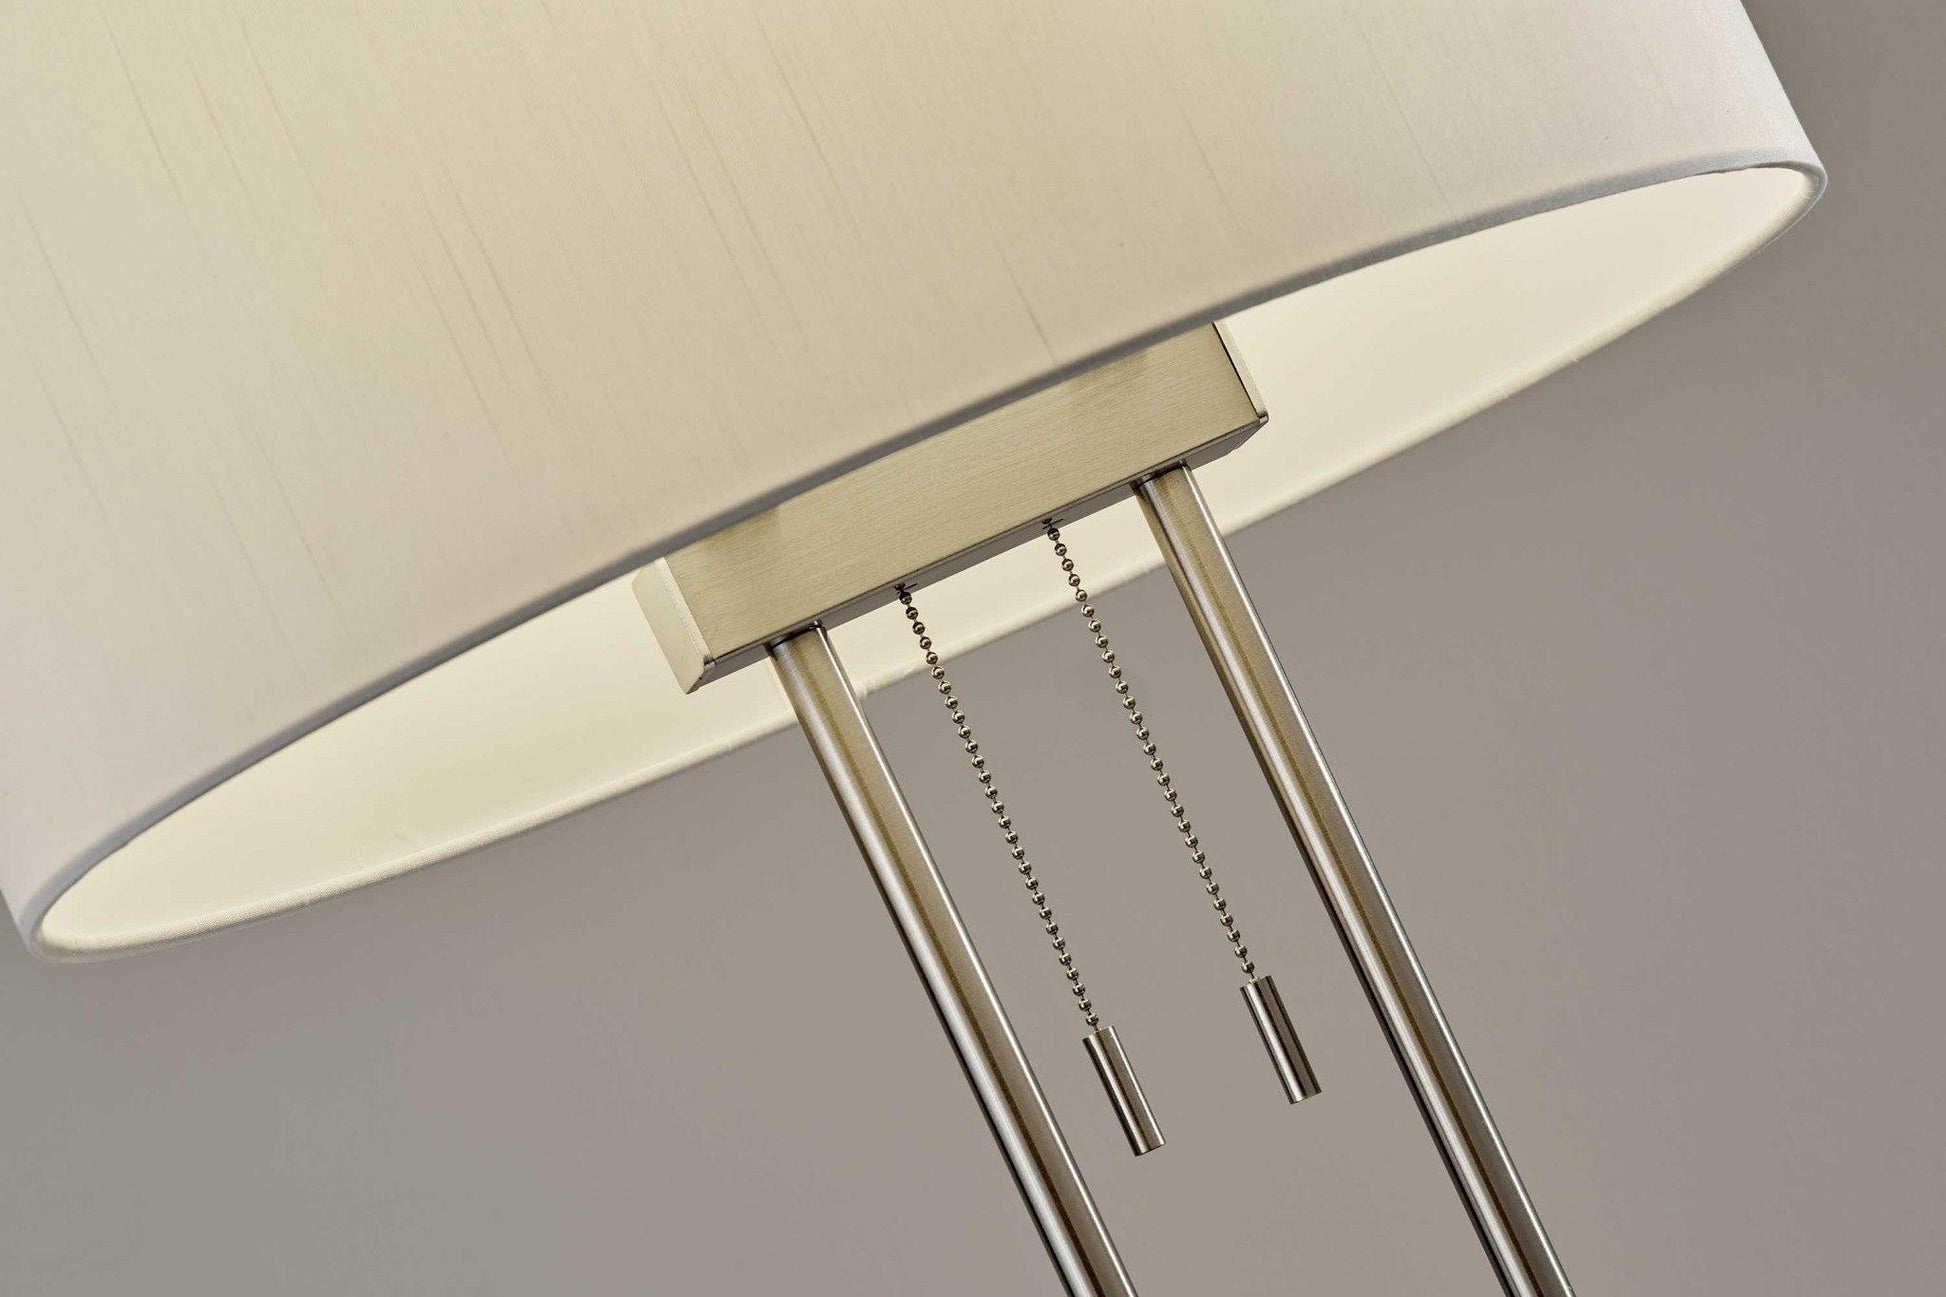 Brushed Steel Dual Pole Metal Table Lamp - AFS